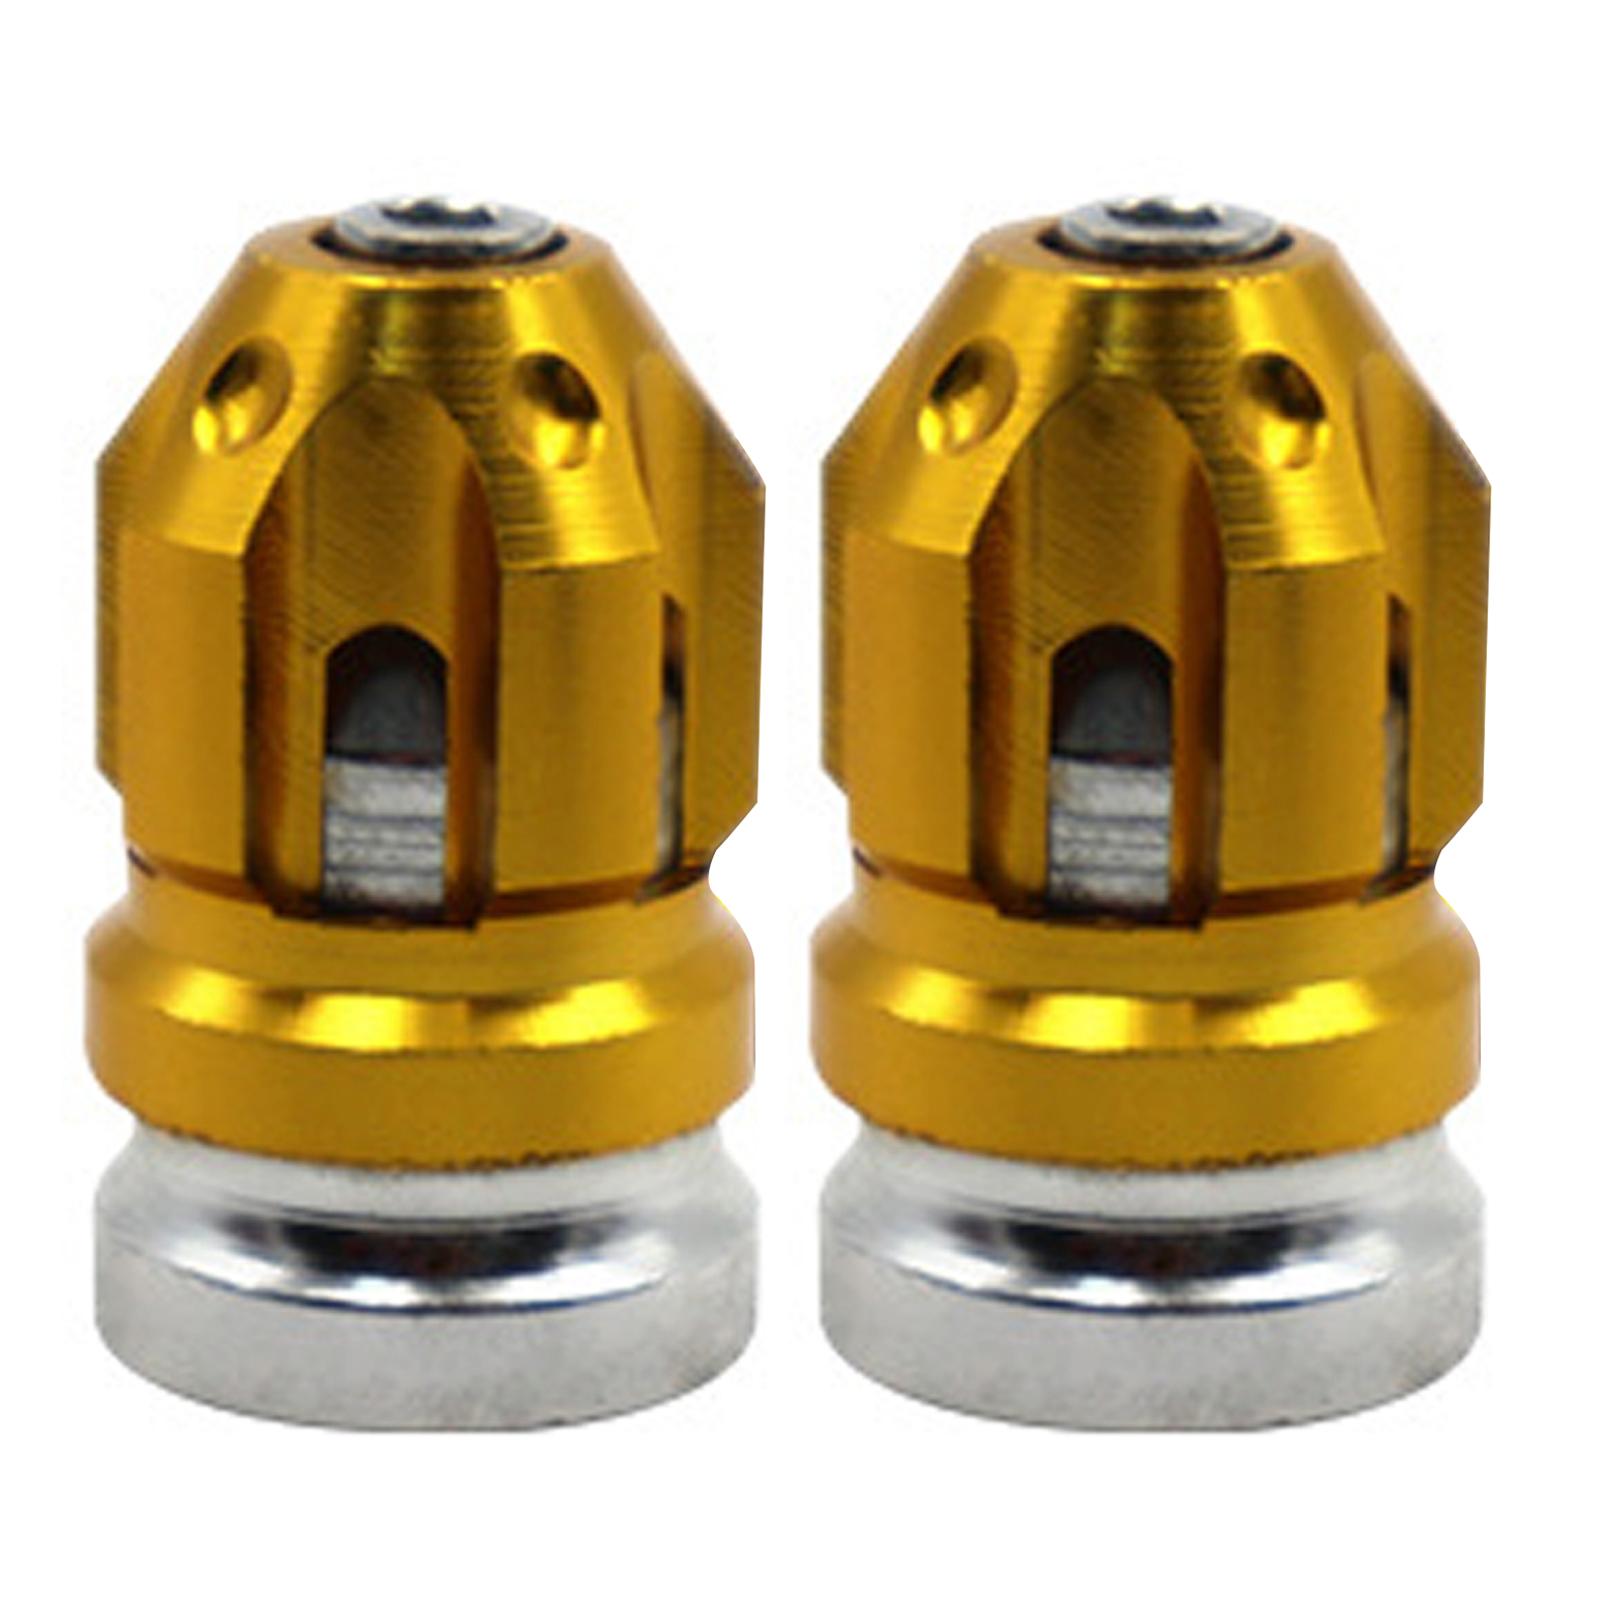 2Pcs Tire Valve Stem Caps Protection Fit for Motorcycles Suvs Mountain Bike Gold 